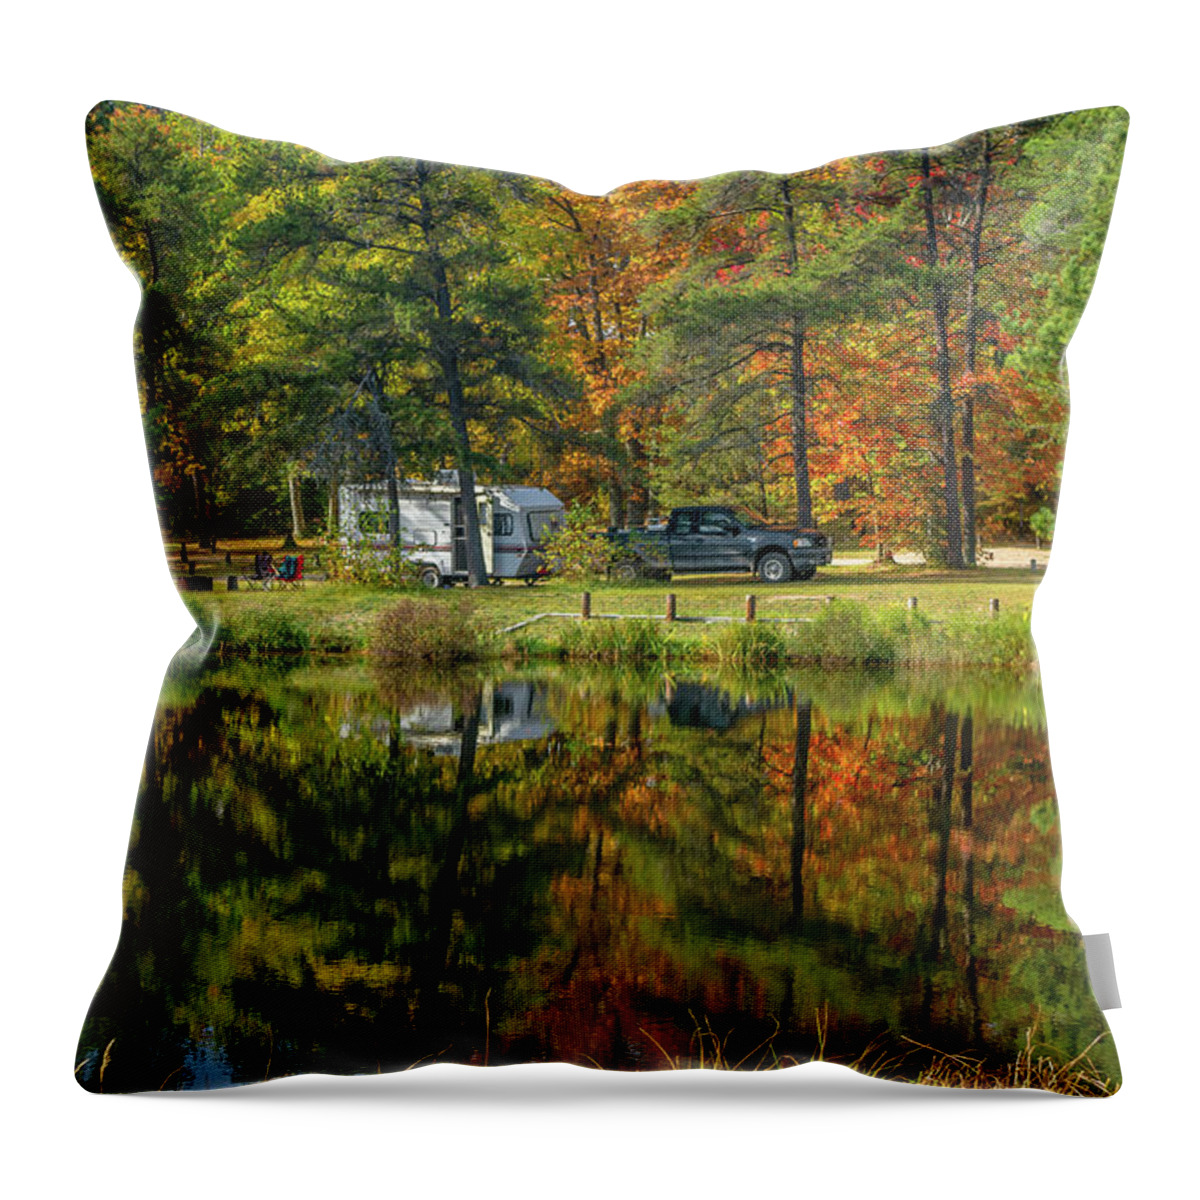 Blind Sucker Throw Pillow featuring the photograph Fall Camping by Gary McCormick